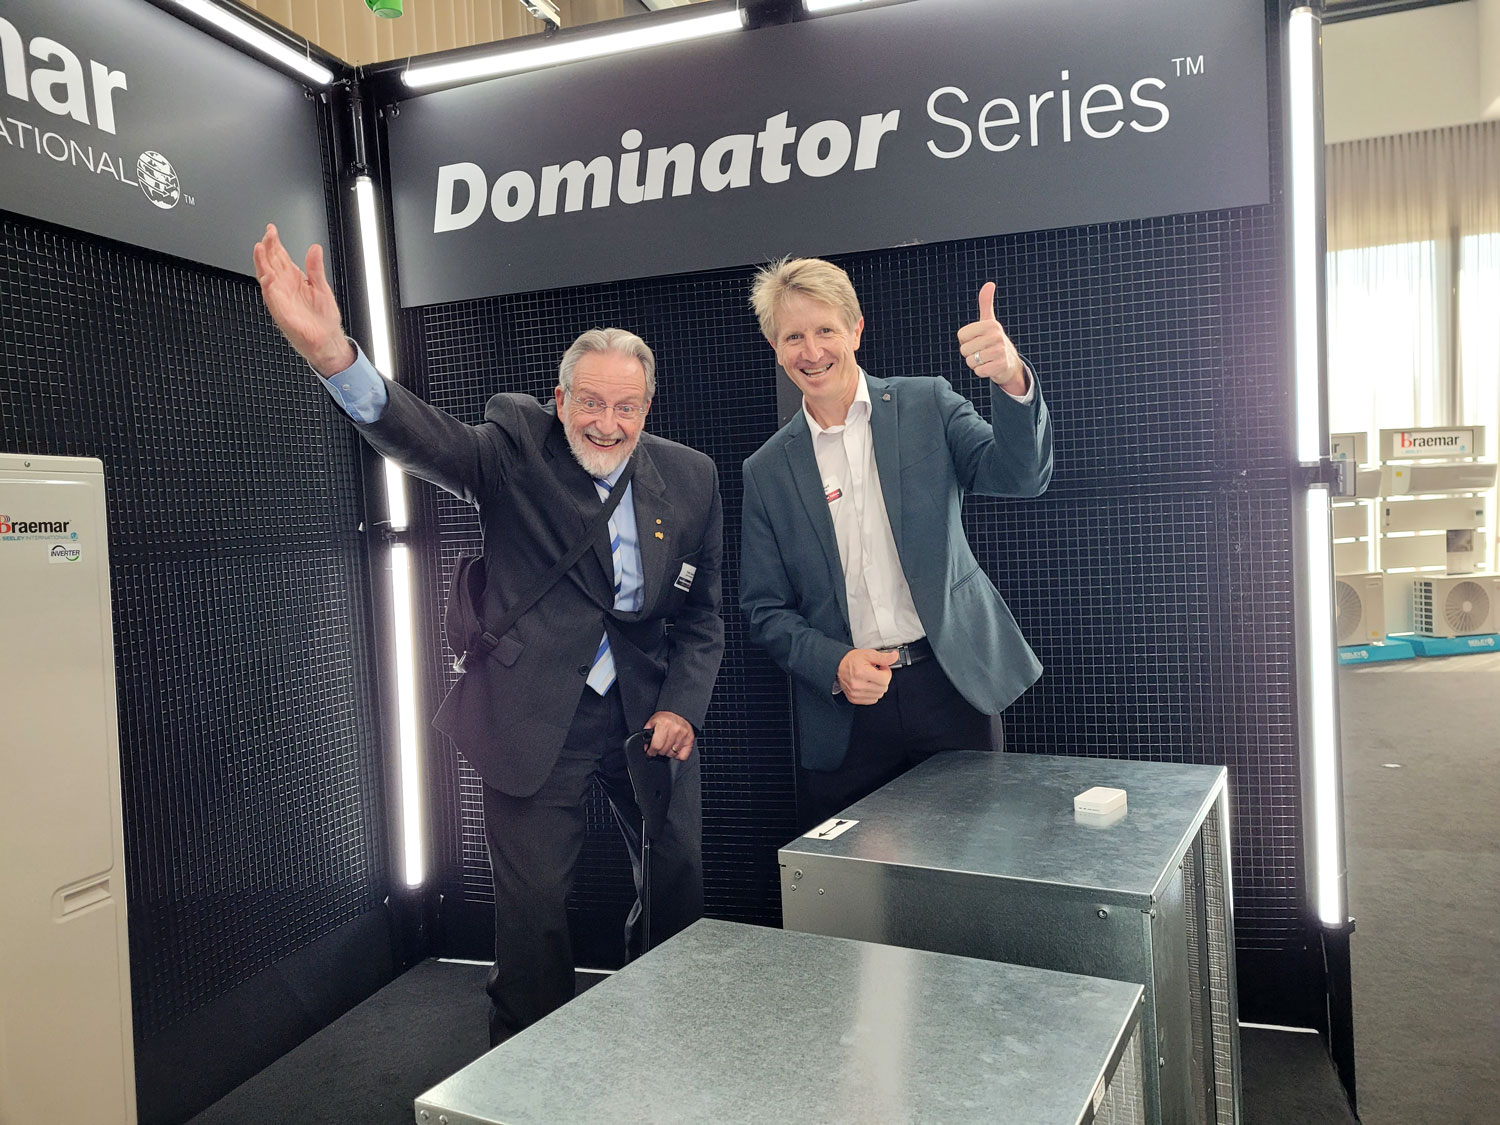 Frank Seeley and Dion McConnel at the Braemar Dominator Series launch event